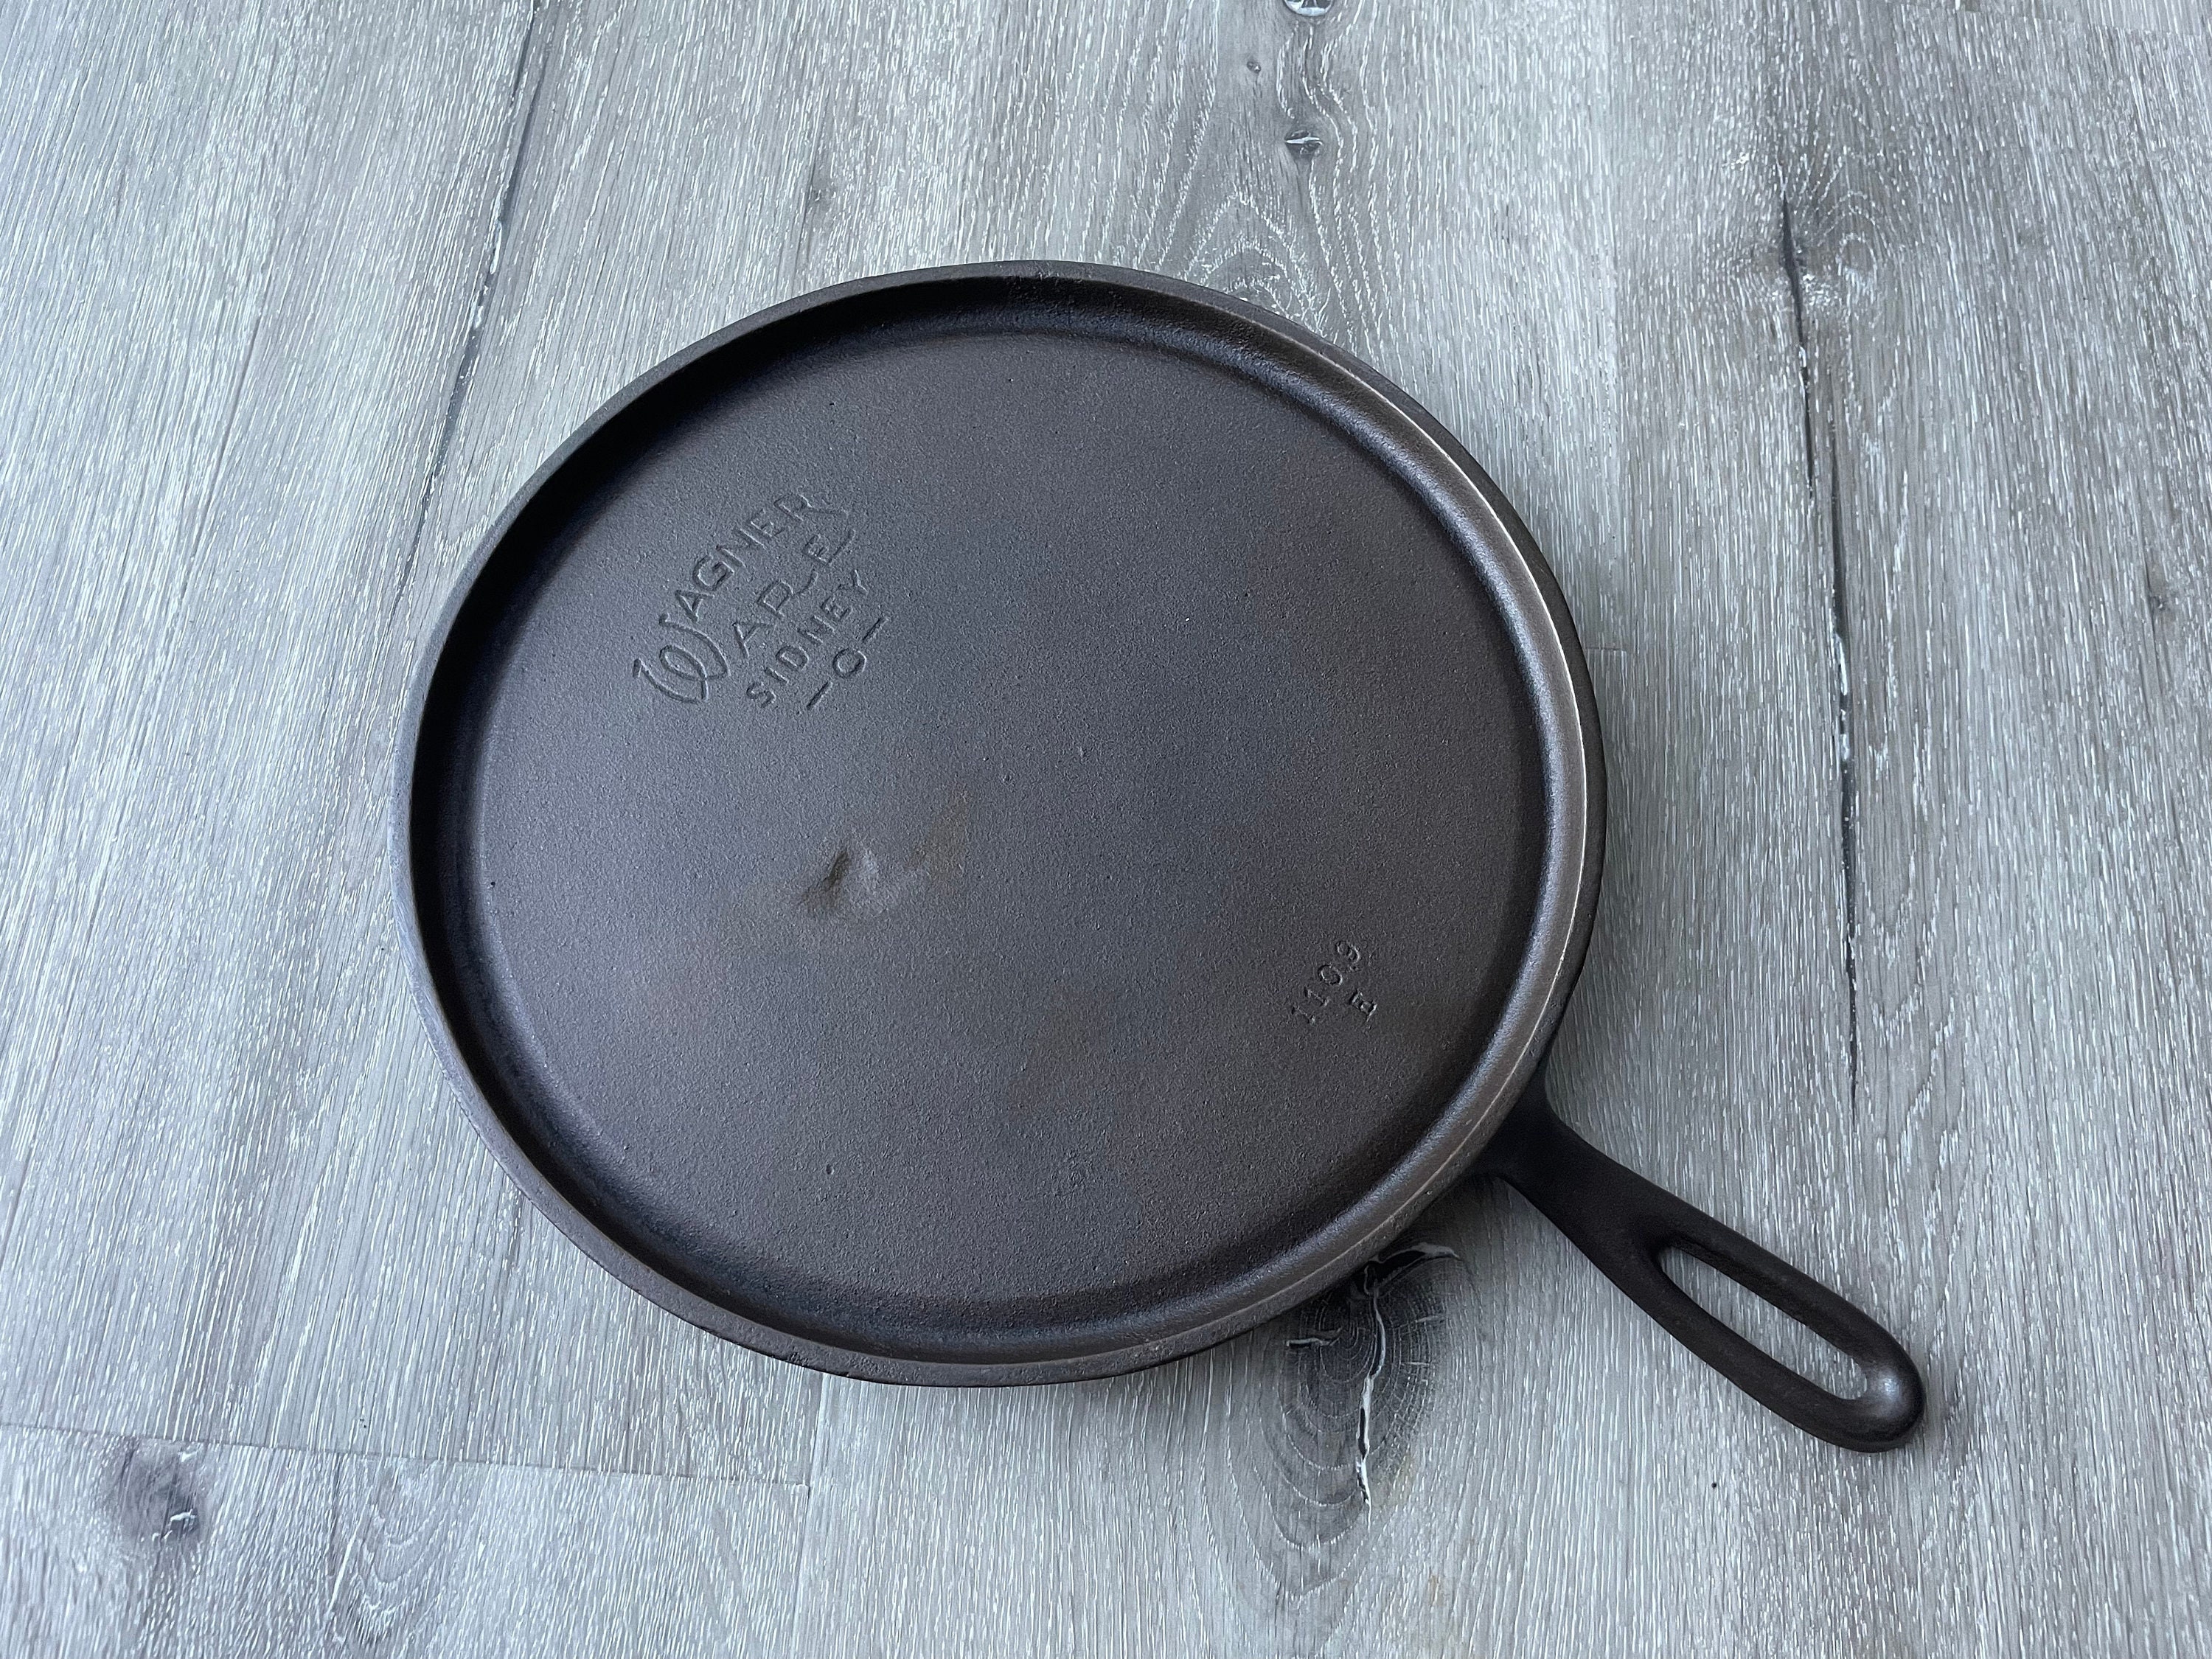 Sold at Auction: Vintage Wagner Ware #0 Cast Iron Round Griddle